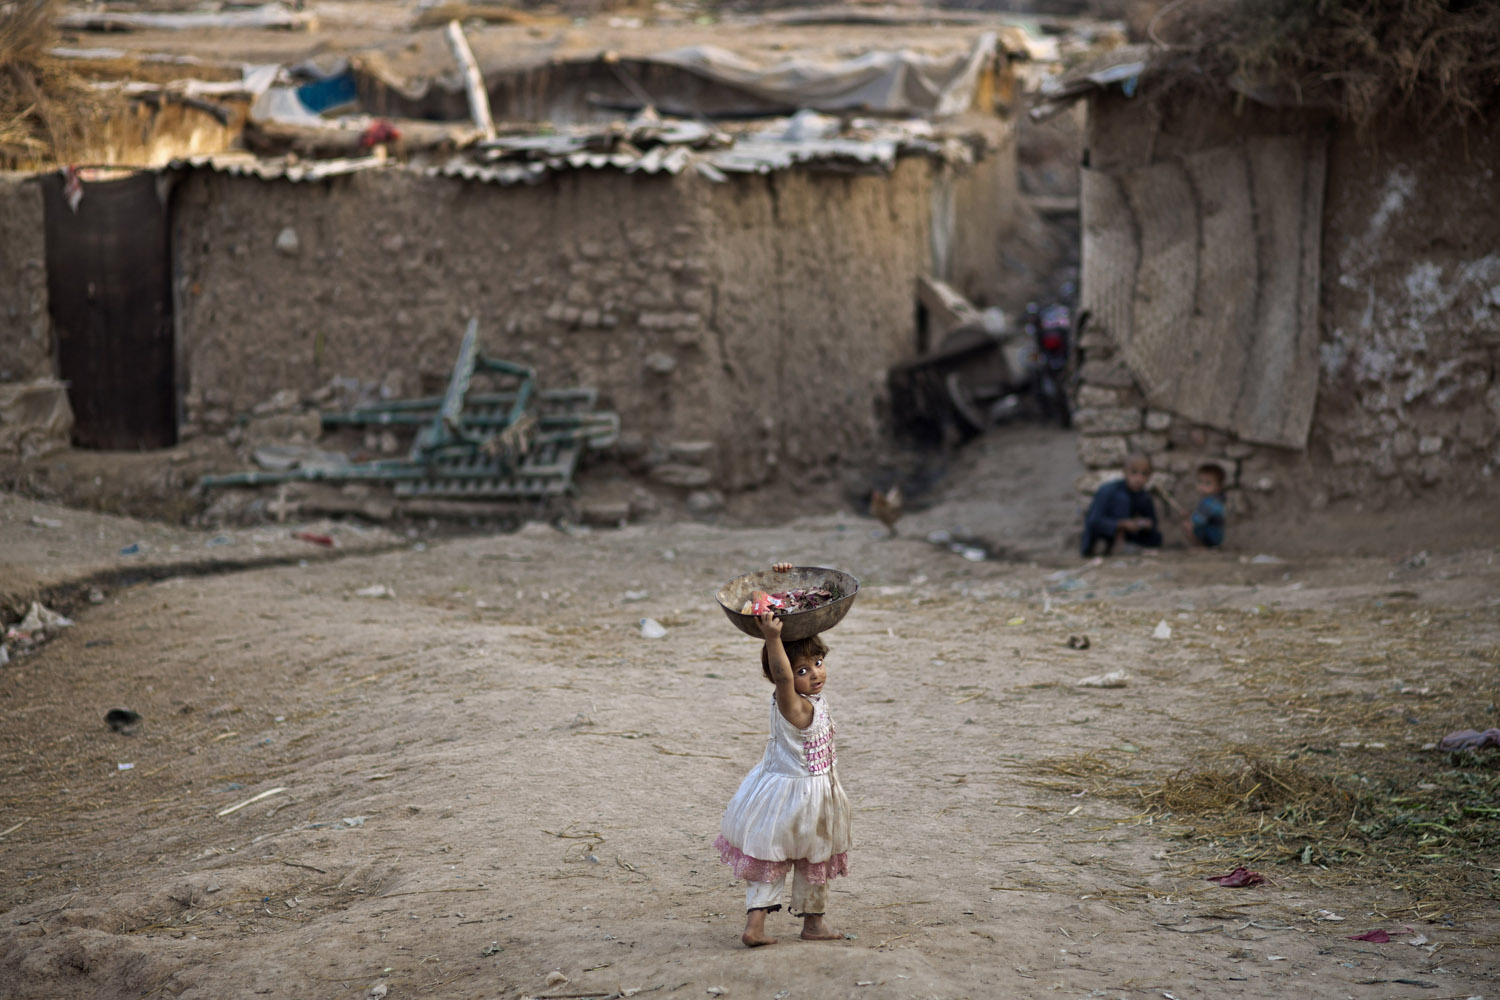 Oct. 23, 2013. An Afghan refugee child, looks behind her while walking back to her home in a poor neighborhood on the outskirts of Islamabad.